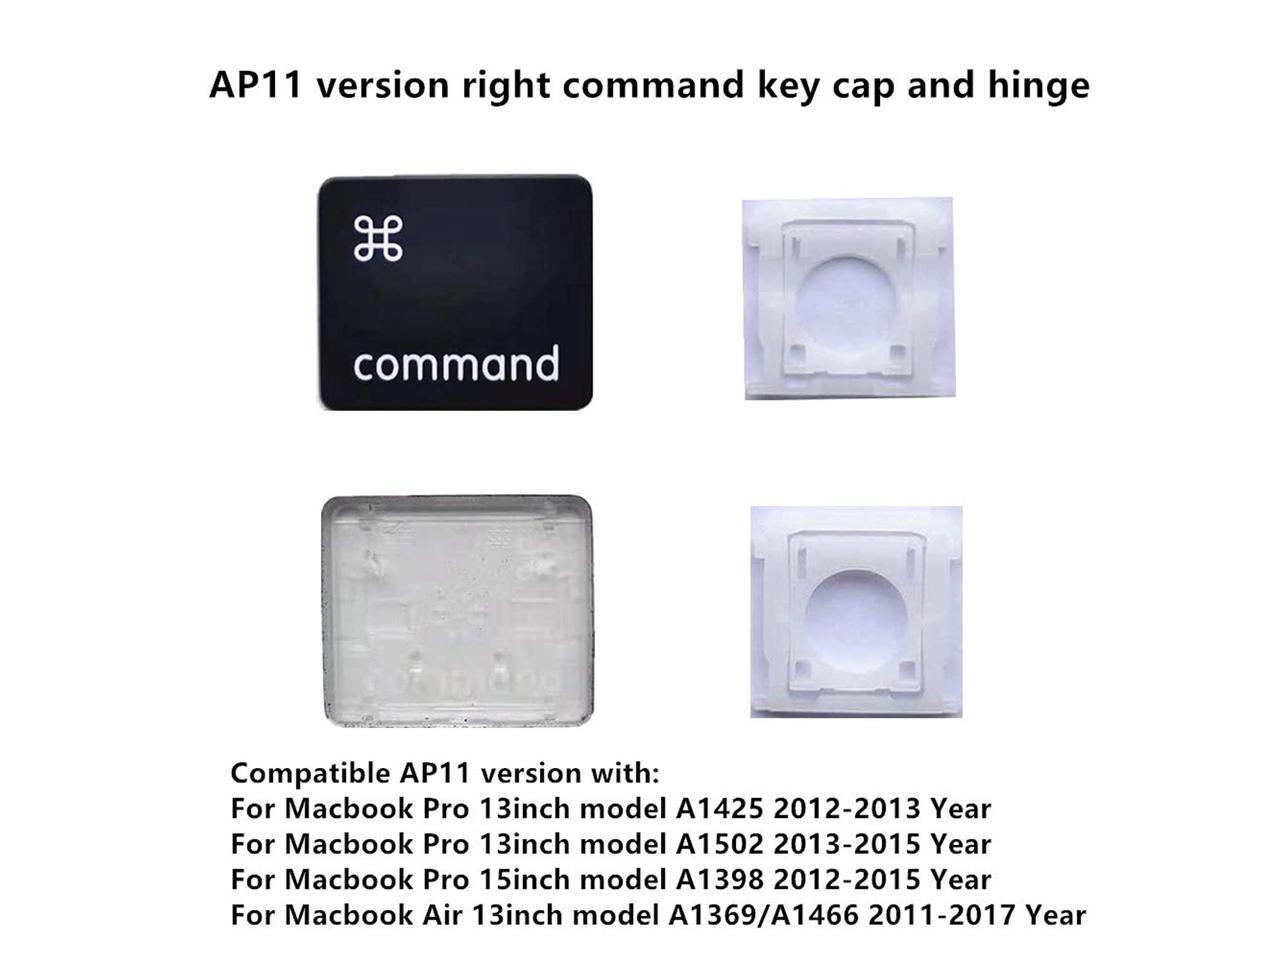 Replacement Individual AP11 Type Fn Key Cap and Hinge for MacBook Pro Model A1425 A1502 A1398 for MacBook Air Model A1369/A1466 Keyboard to Replace The fn KeyCap and Hinge